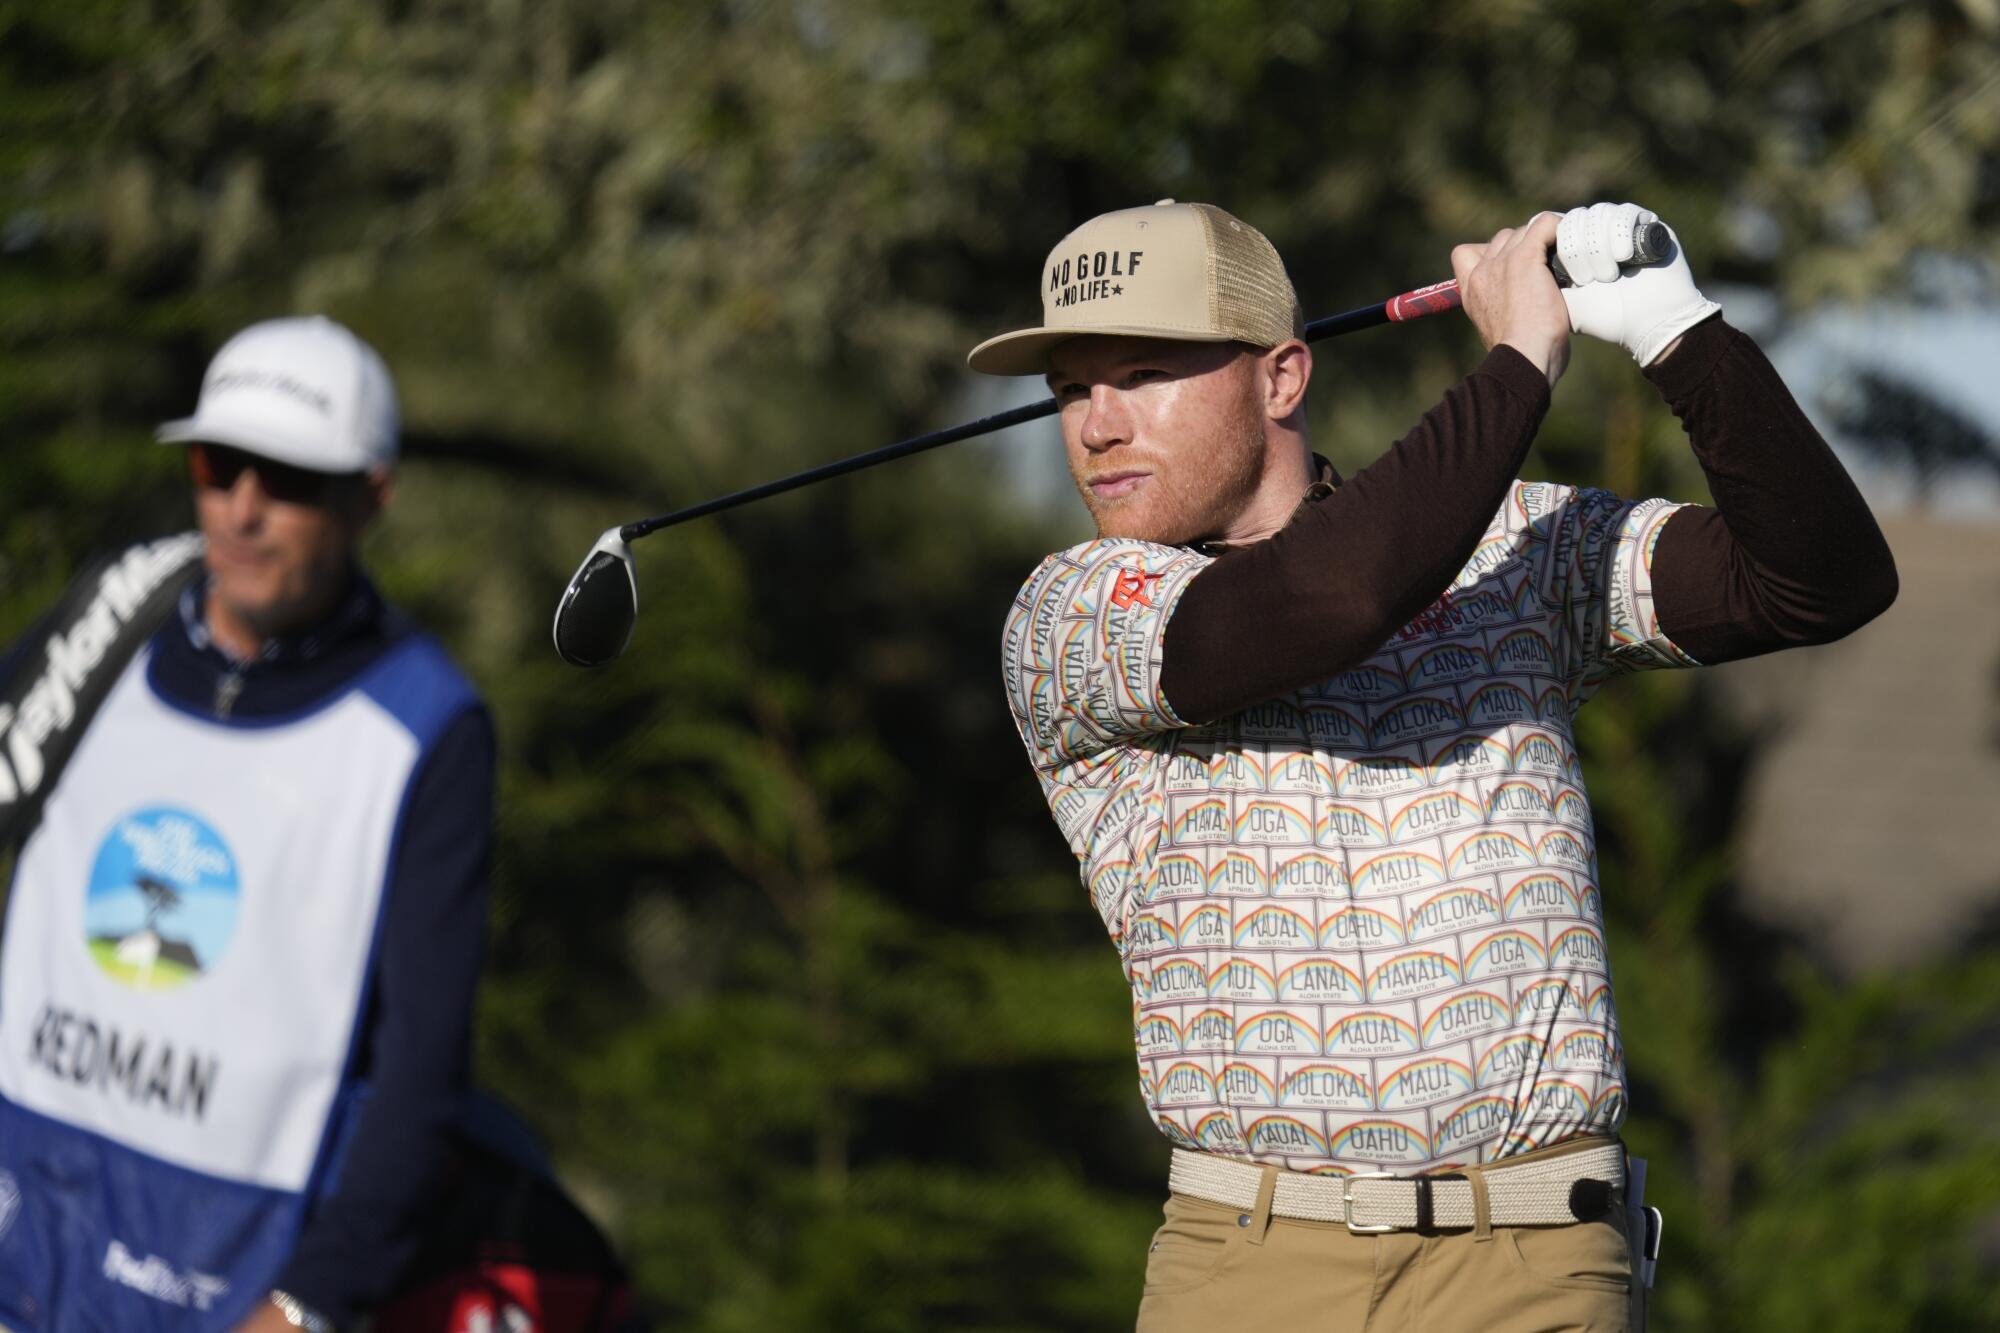 Canelo Alvarez Uninterested in Golf Career: ‘I Need To Be True With Myself’